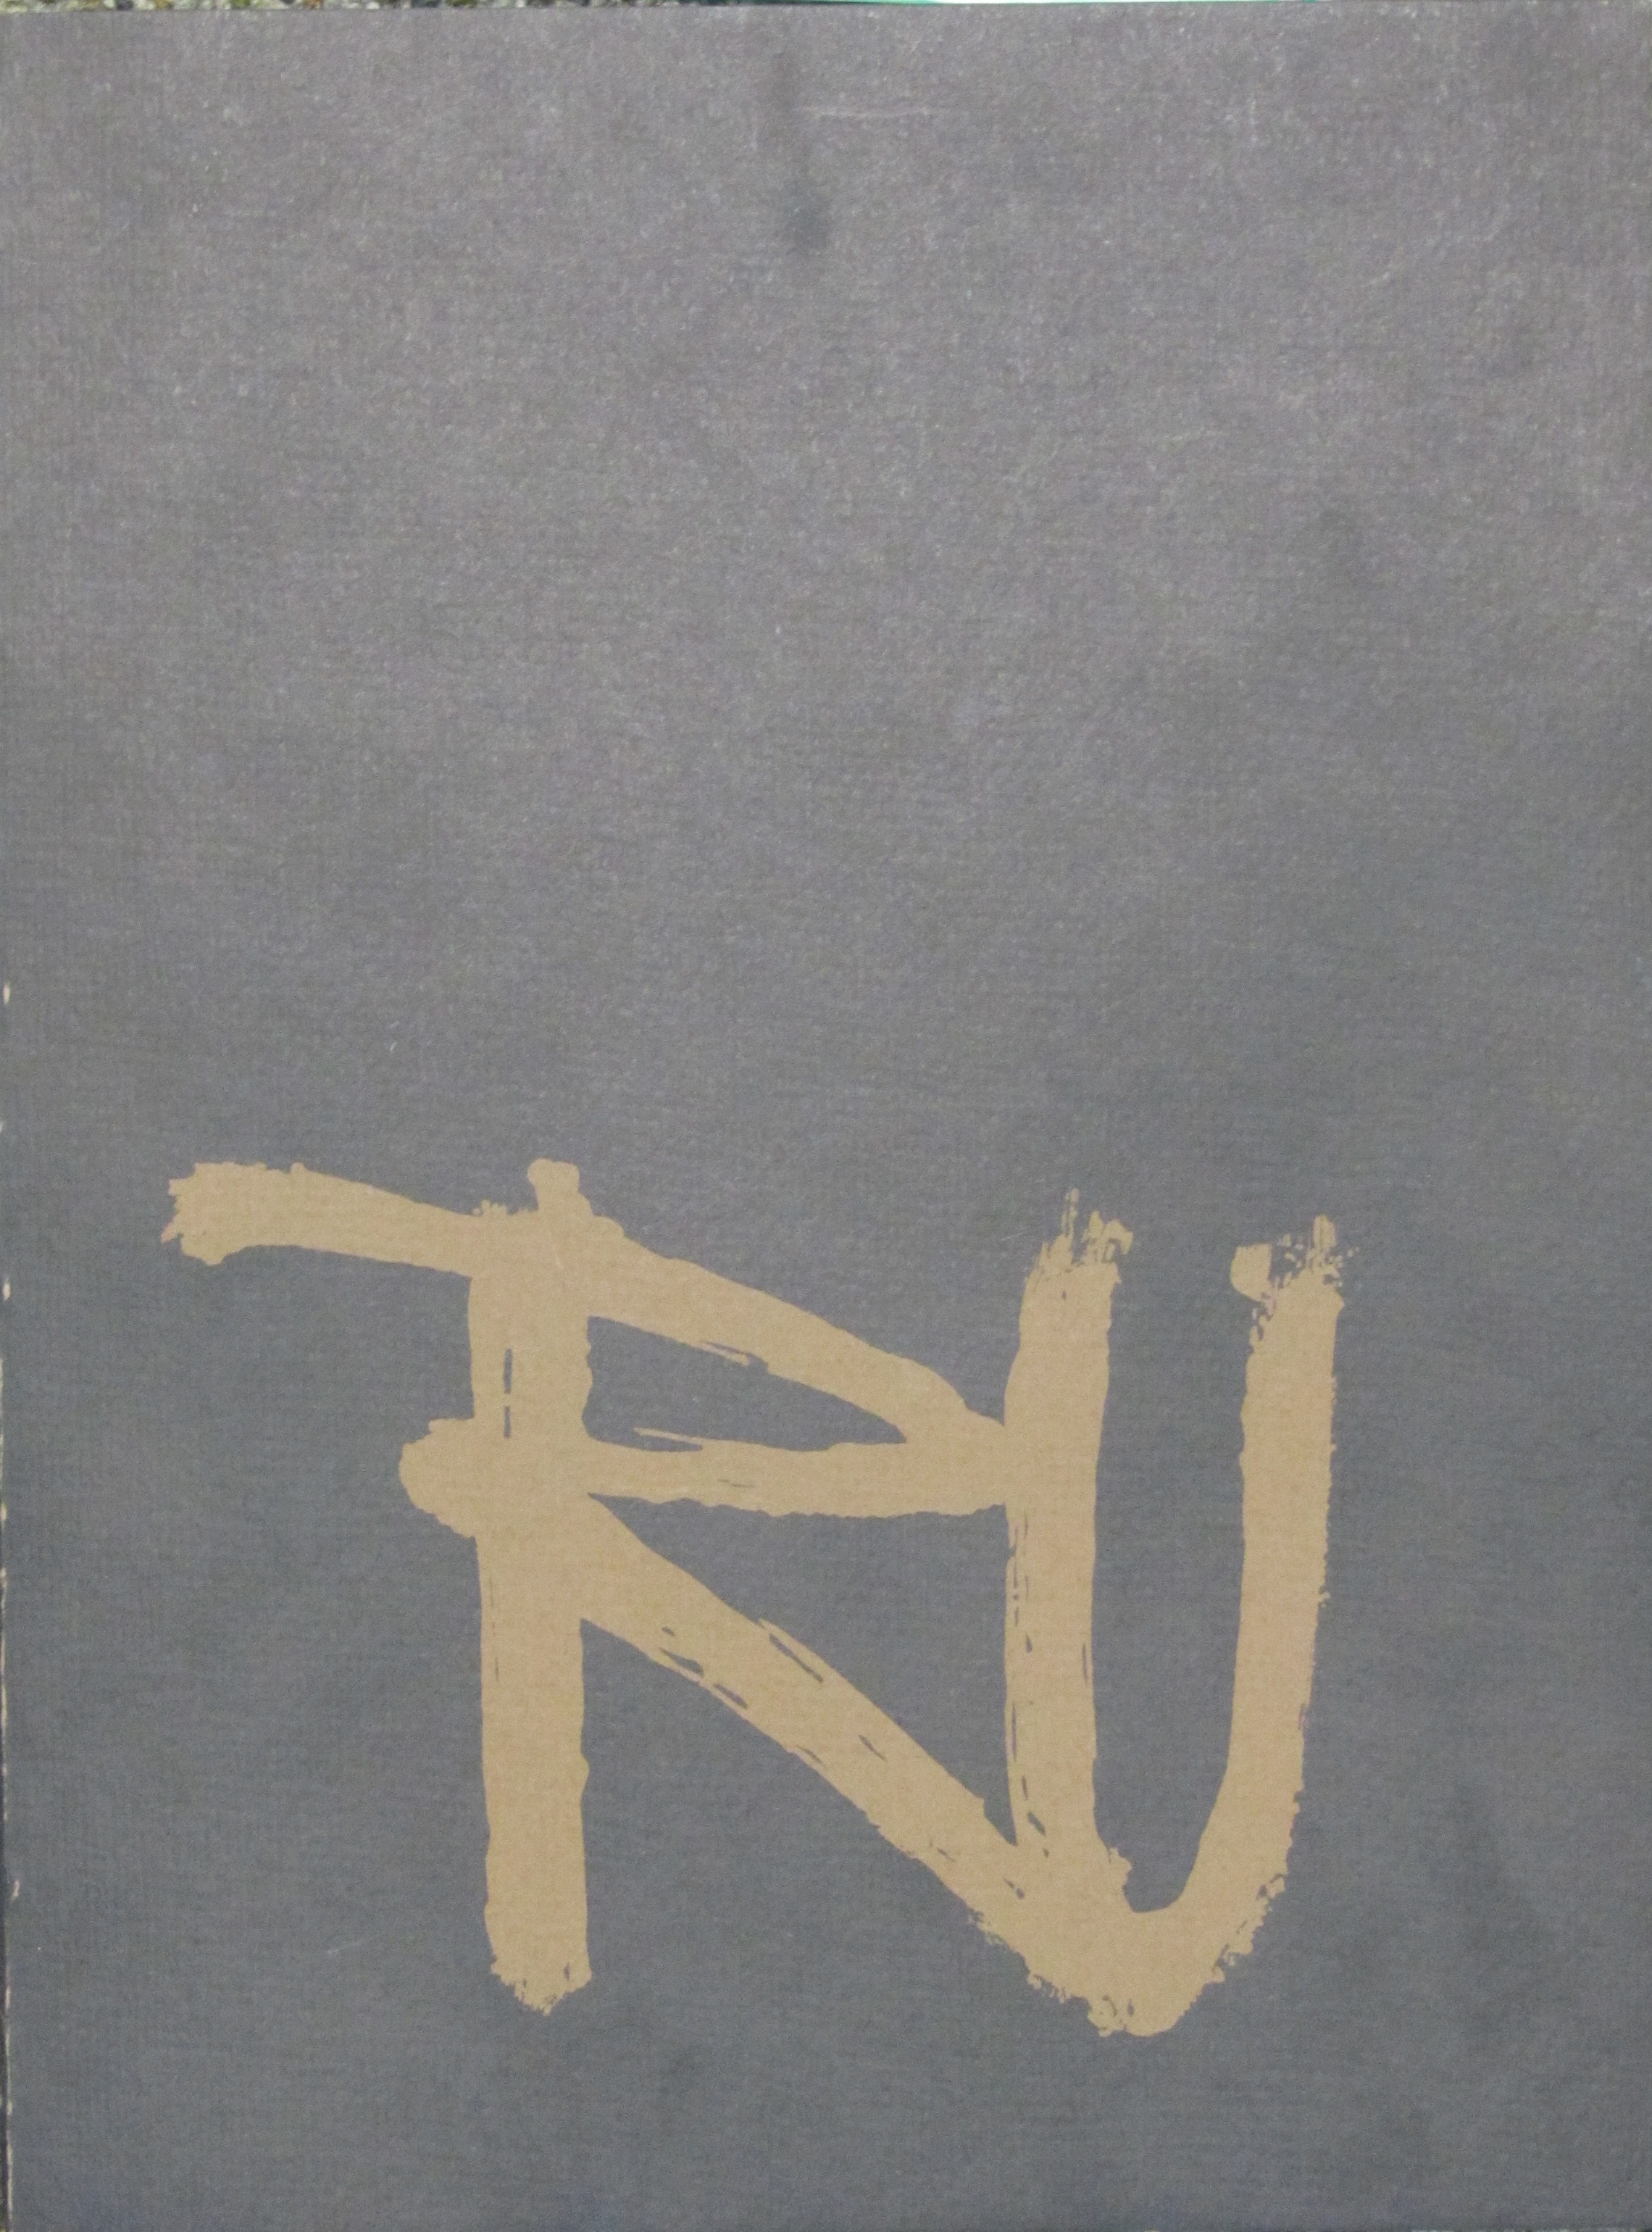 1972 - Scarlet Letter Year Book 1 Cover